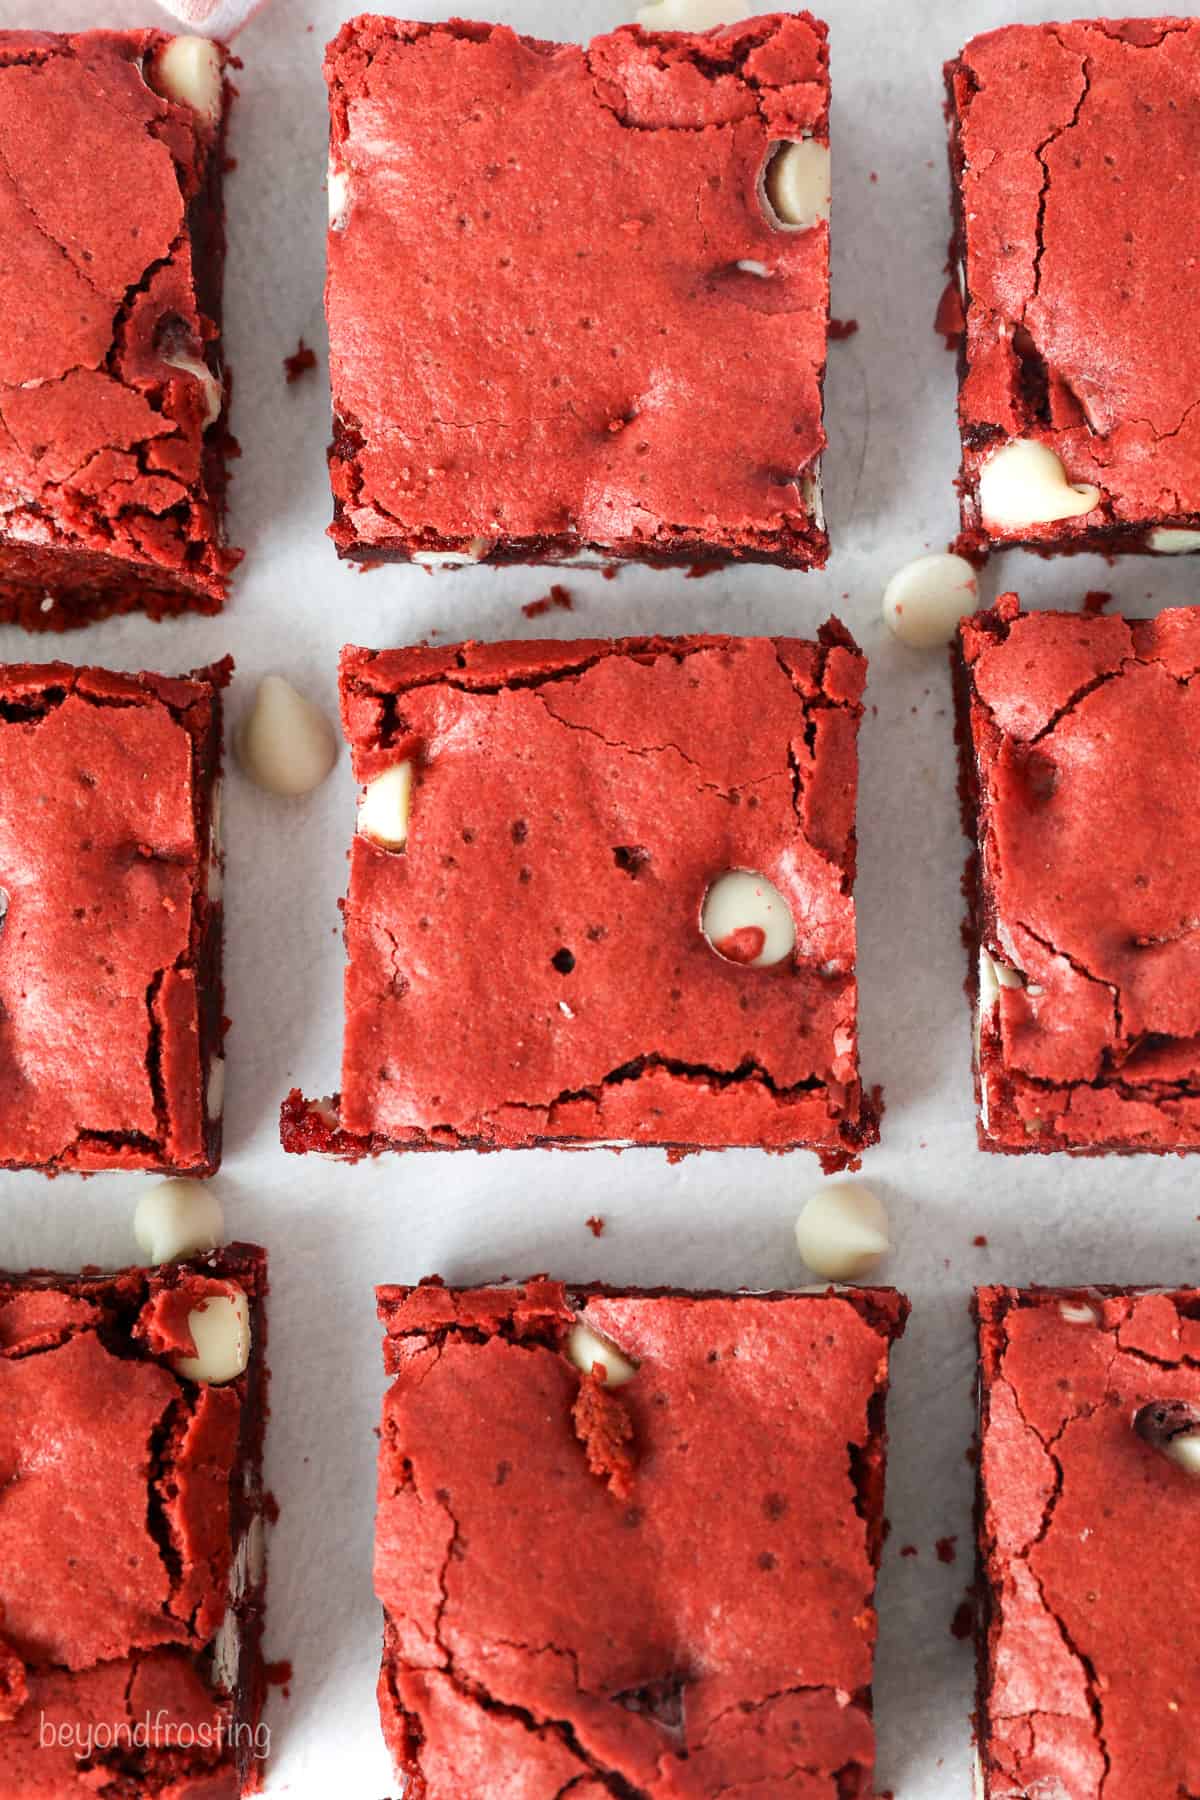 Overhead view of red velvet brownies arranged in rows on a white surface.